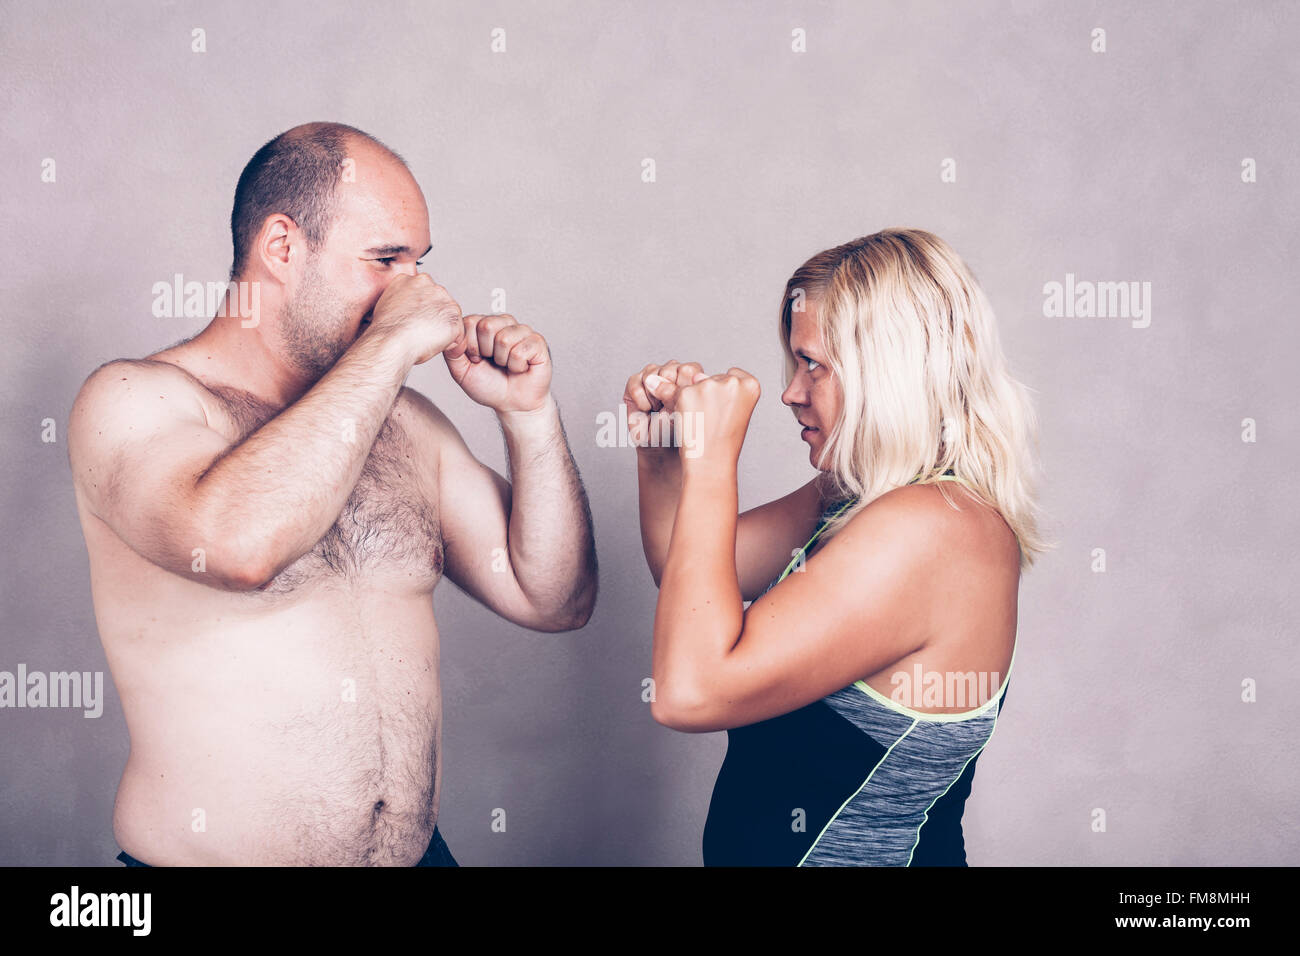 Shirtless corpulent man and woman standing against each other ready to fight. Stock Photo